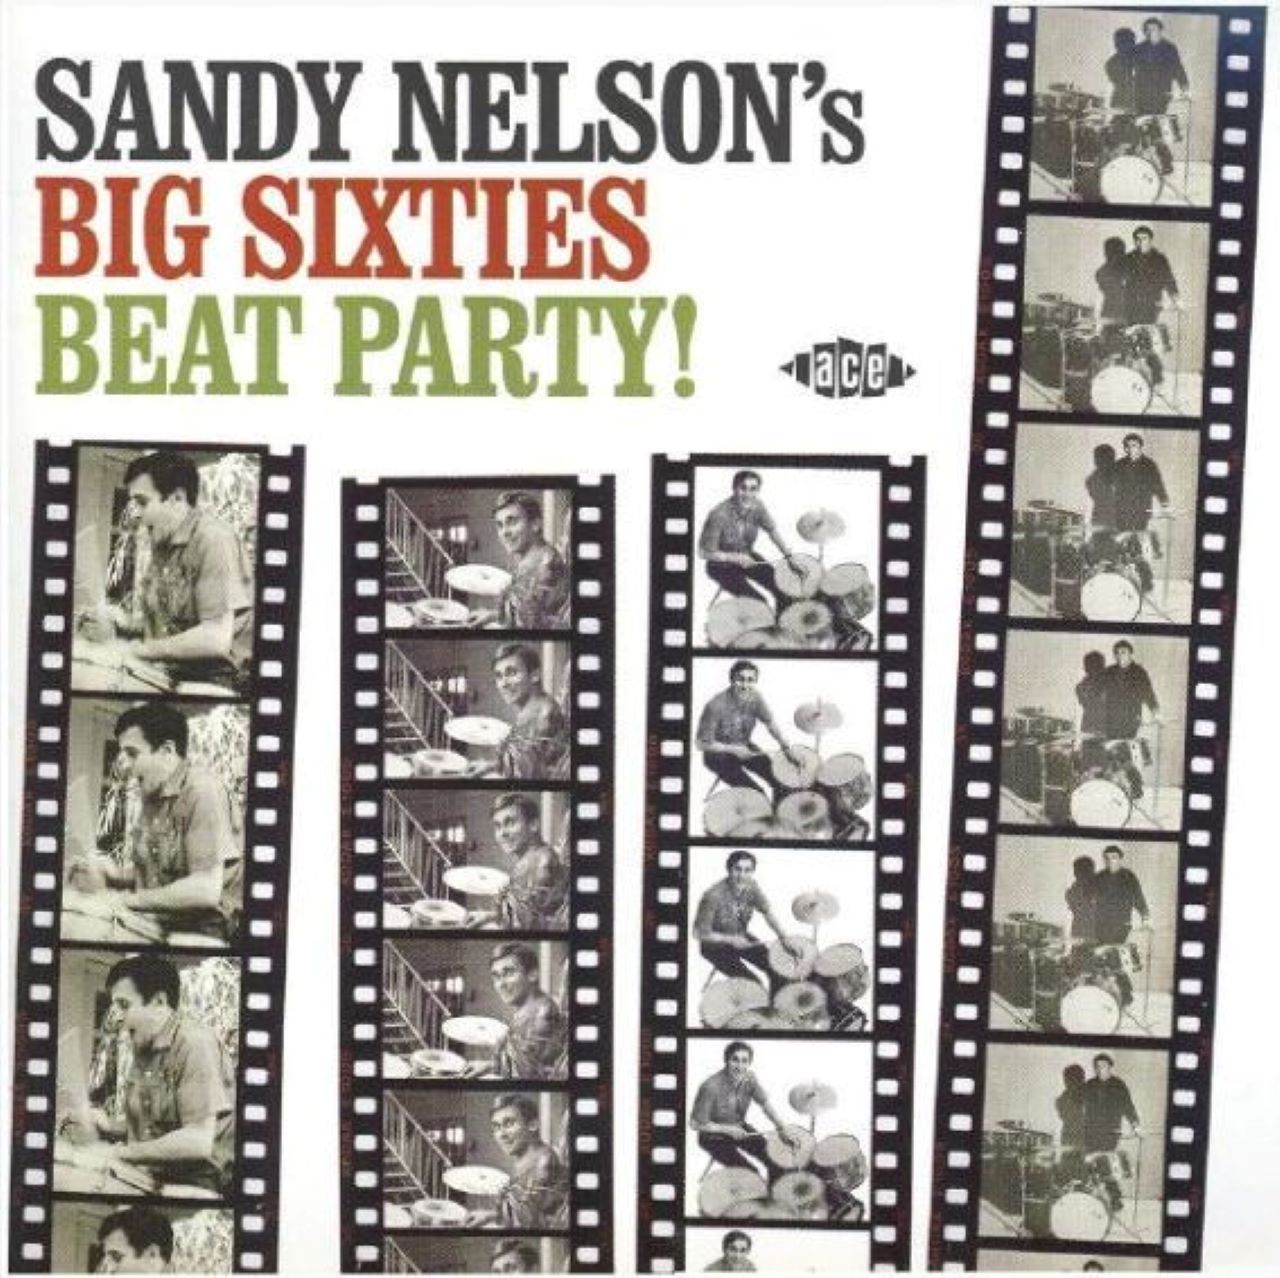 Sandy Nelson - Big Sixties Beat Party cover album